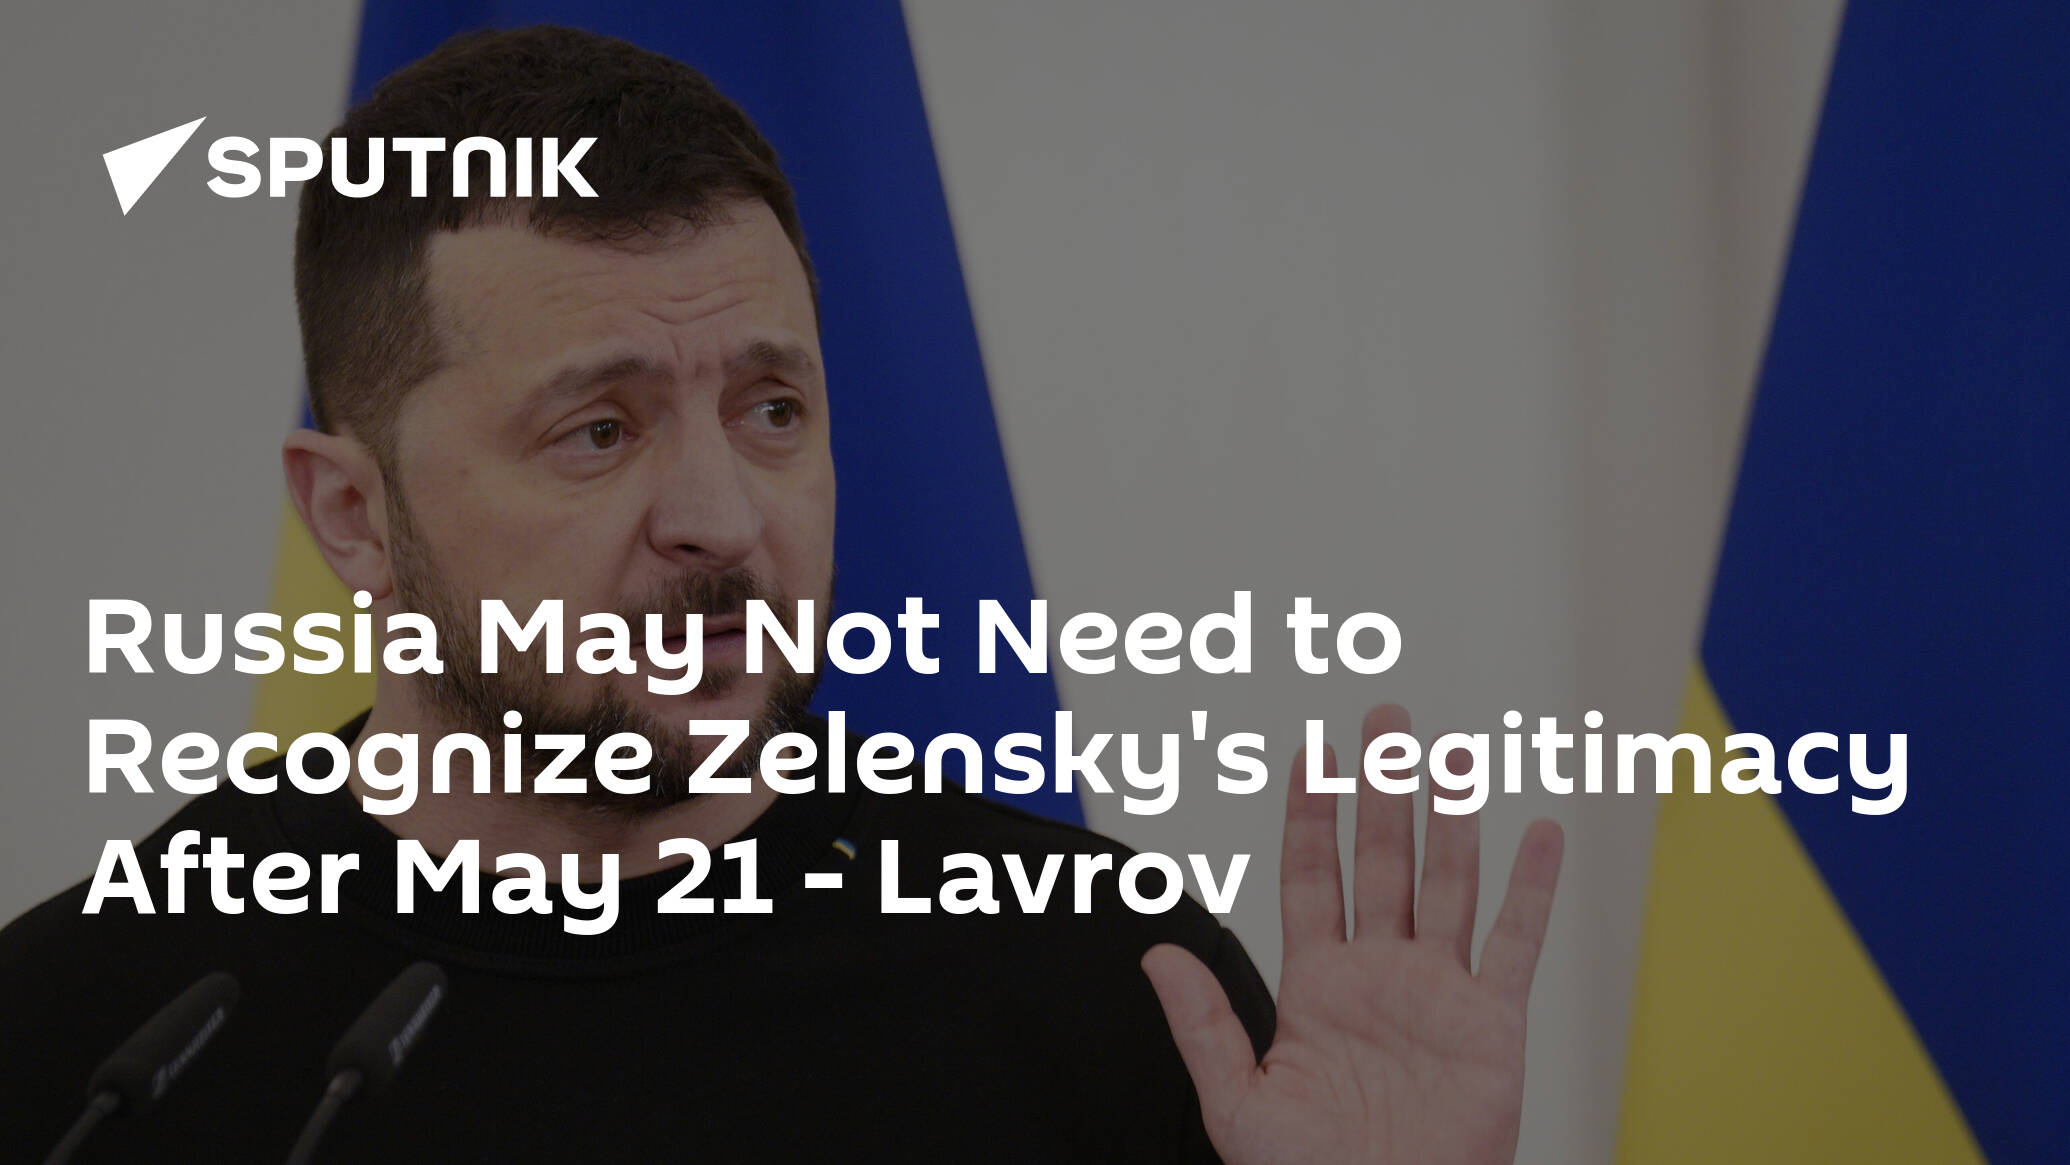 Russia May Not Need to Recognize Zelensky's Legitimacy After May